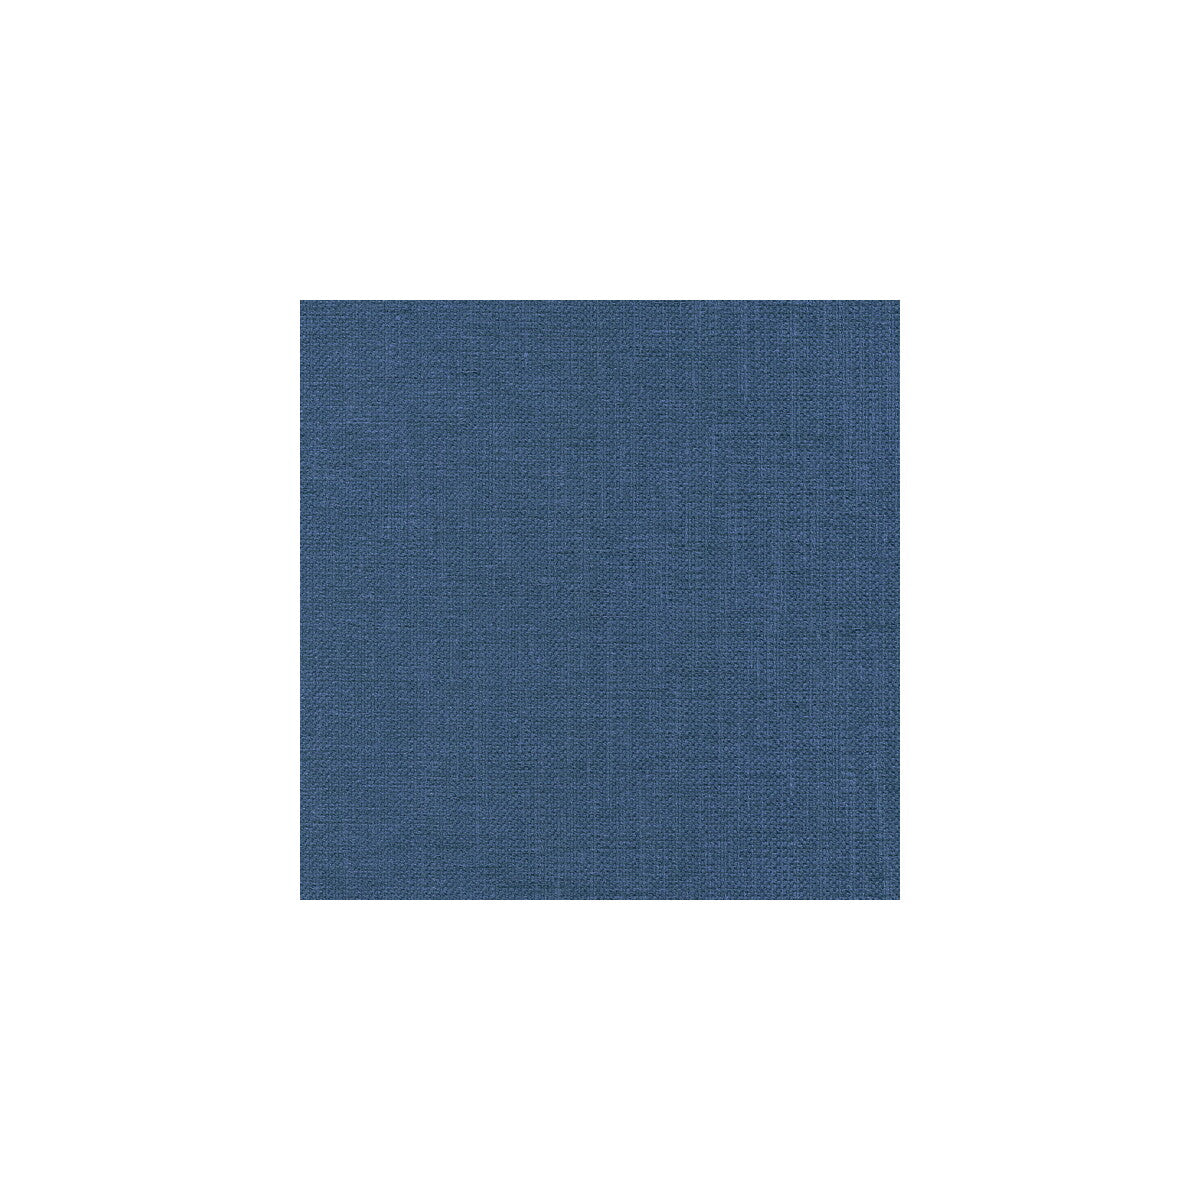 Kravet Basics fabric in 33120-5 color - pattern 33120.5.0 - by Kravet Basics in the Perfect Plains collection